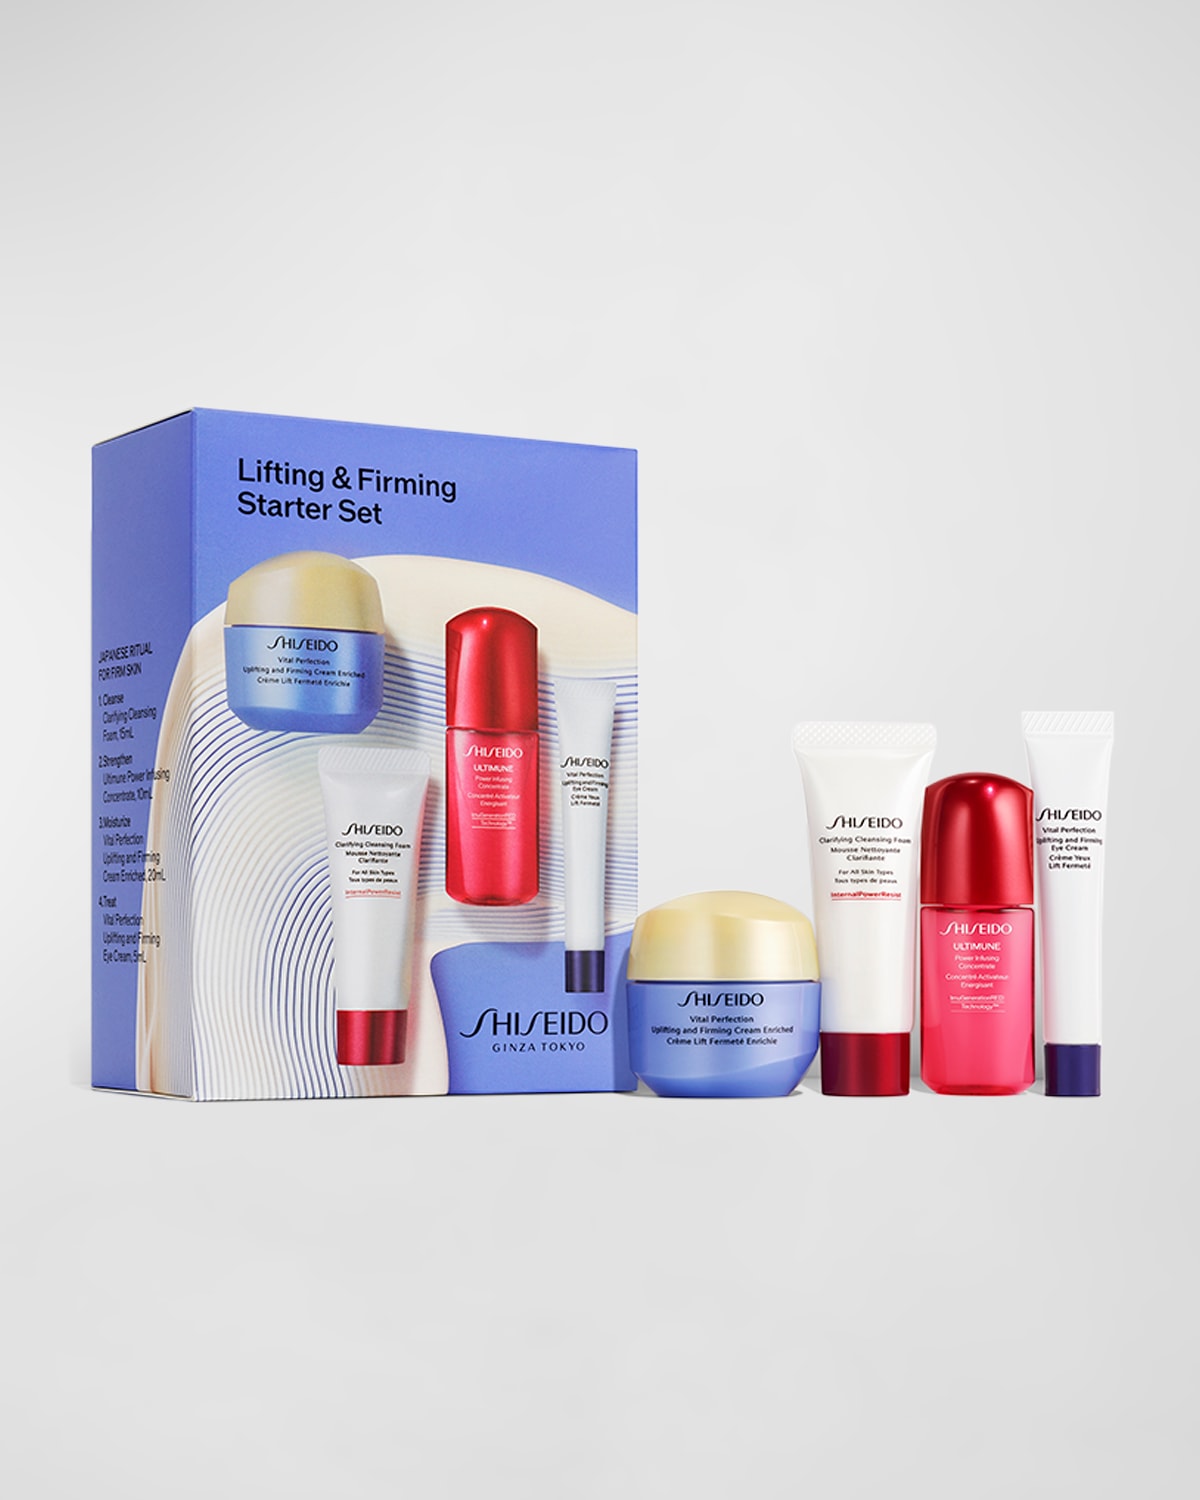 Limited Edition Lifting and Firming Starter Set ($118 Value)